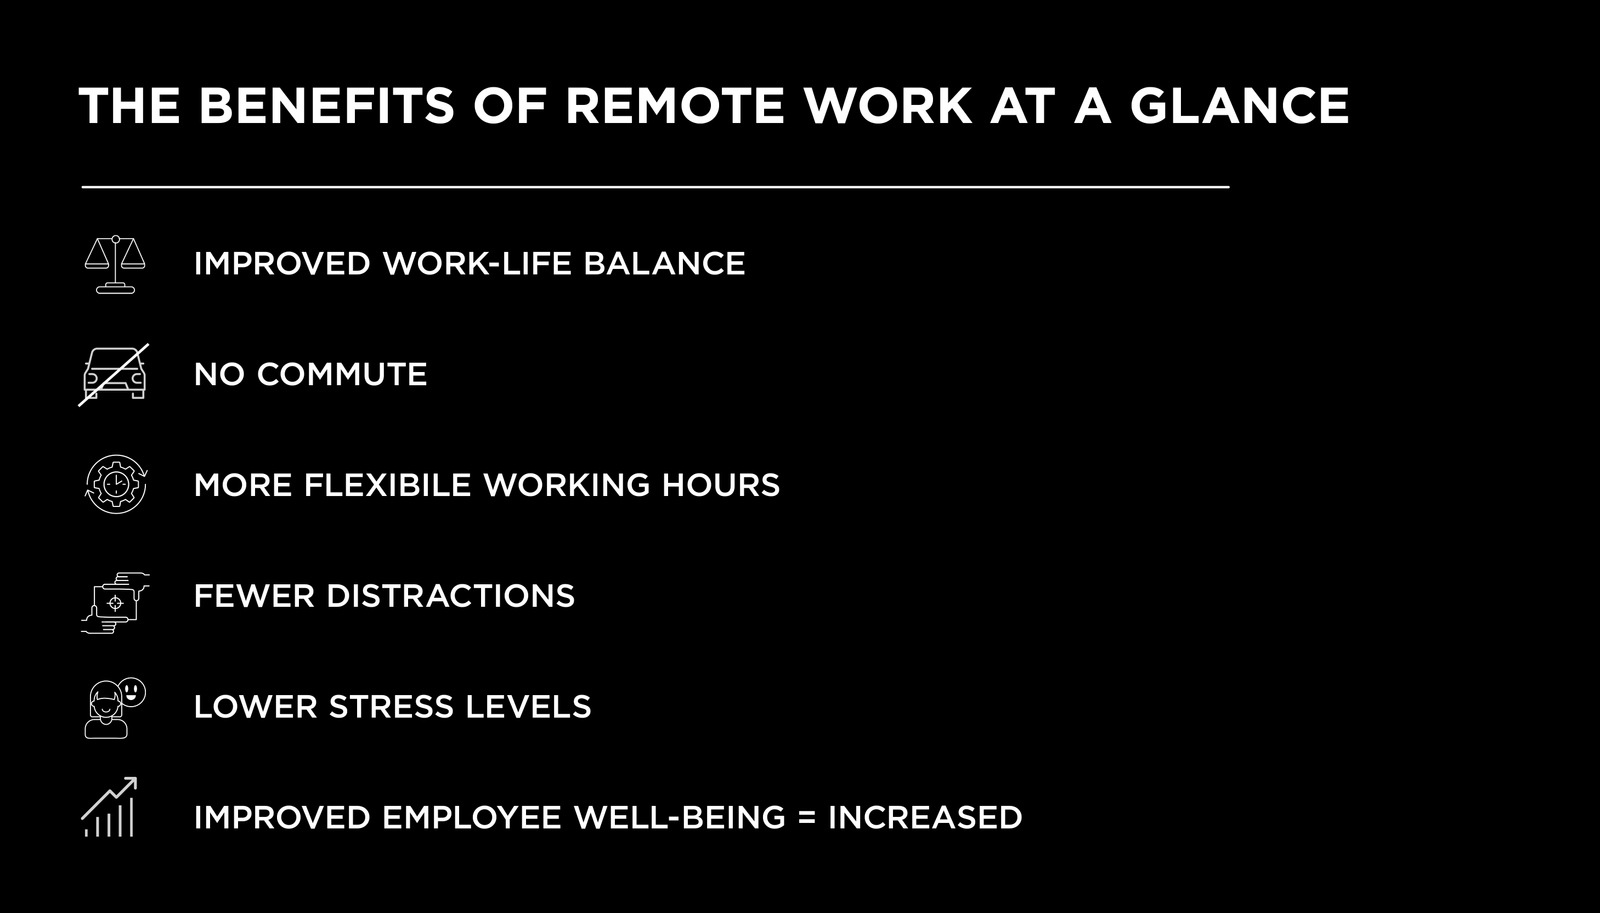 Graphic from WAS Germany about the benefits of remote work